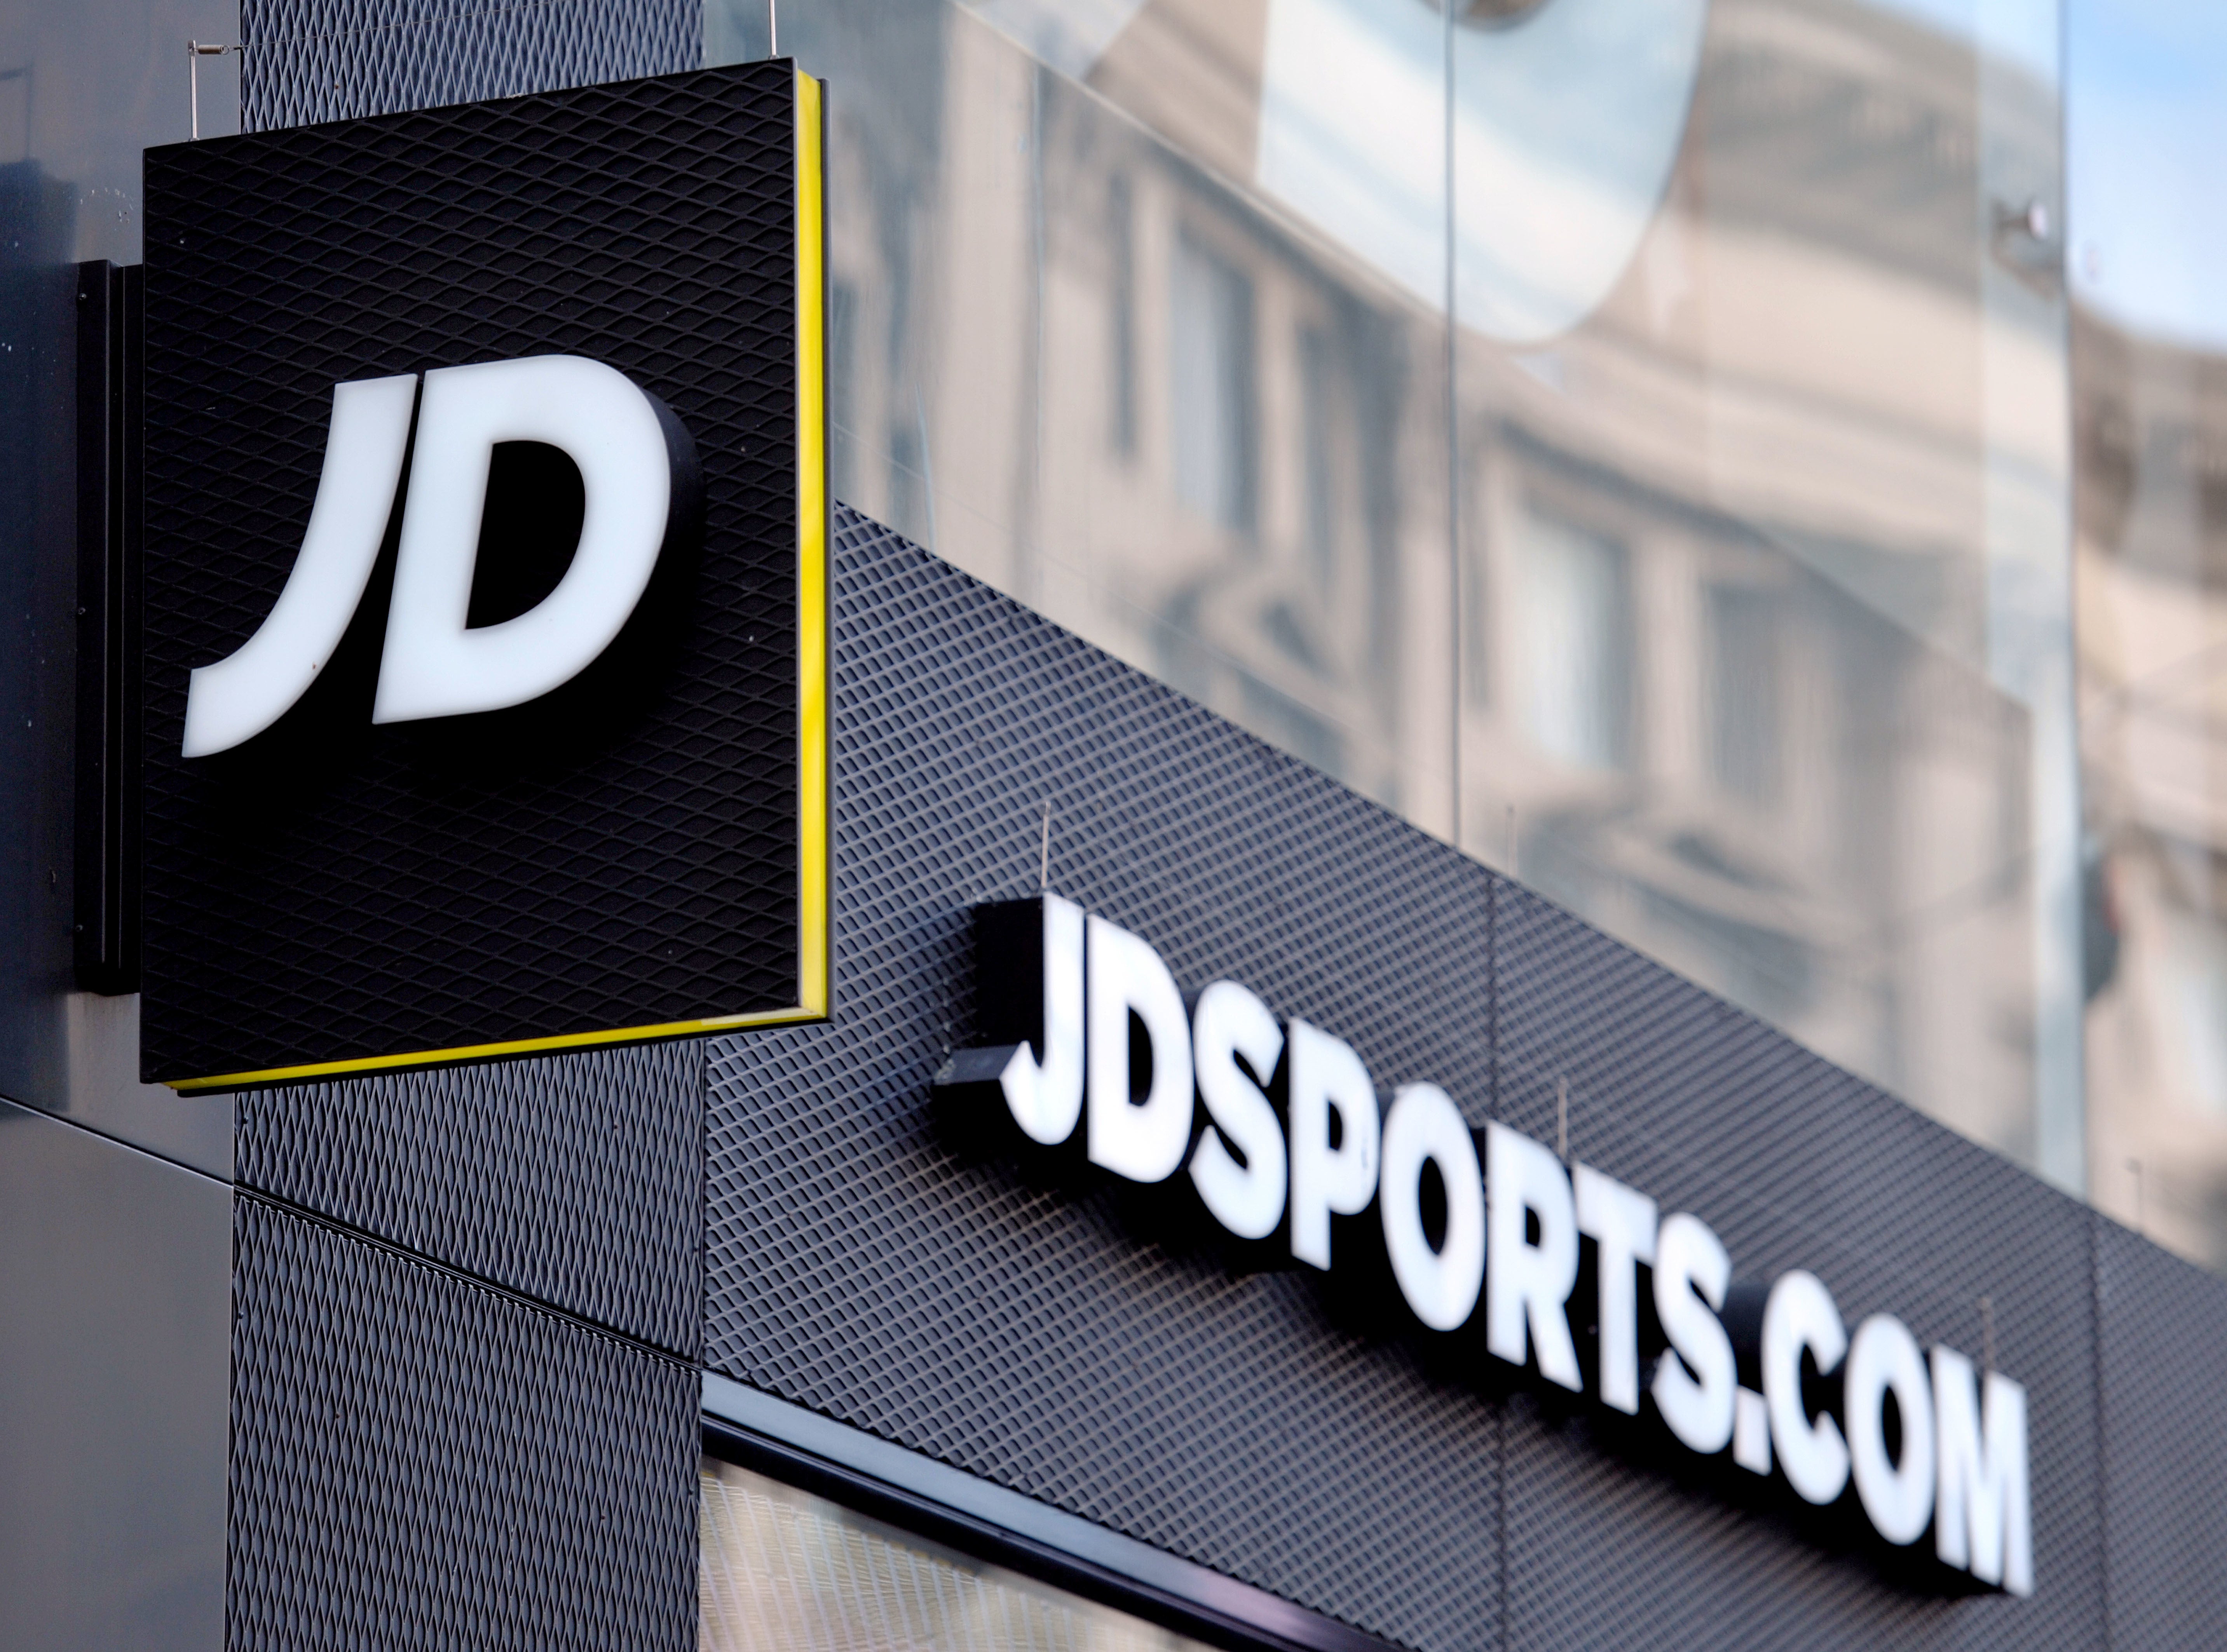 JD Sports has agreed to pay £5.5 million to former boss Peter Cowgill after he stepped down from the sportswear giant in May (Nick Ansell/ PA)